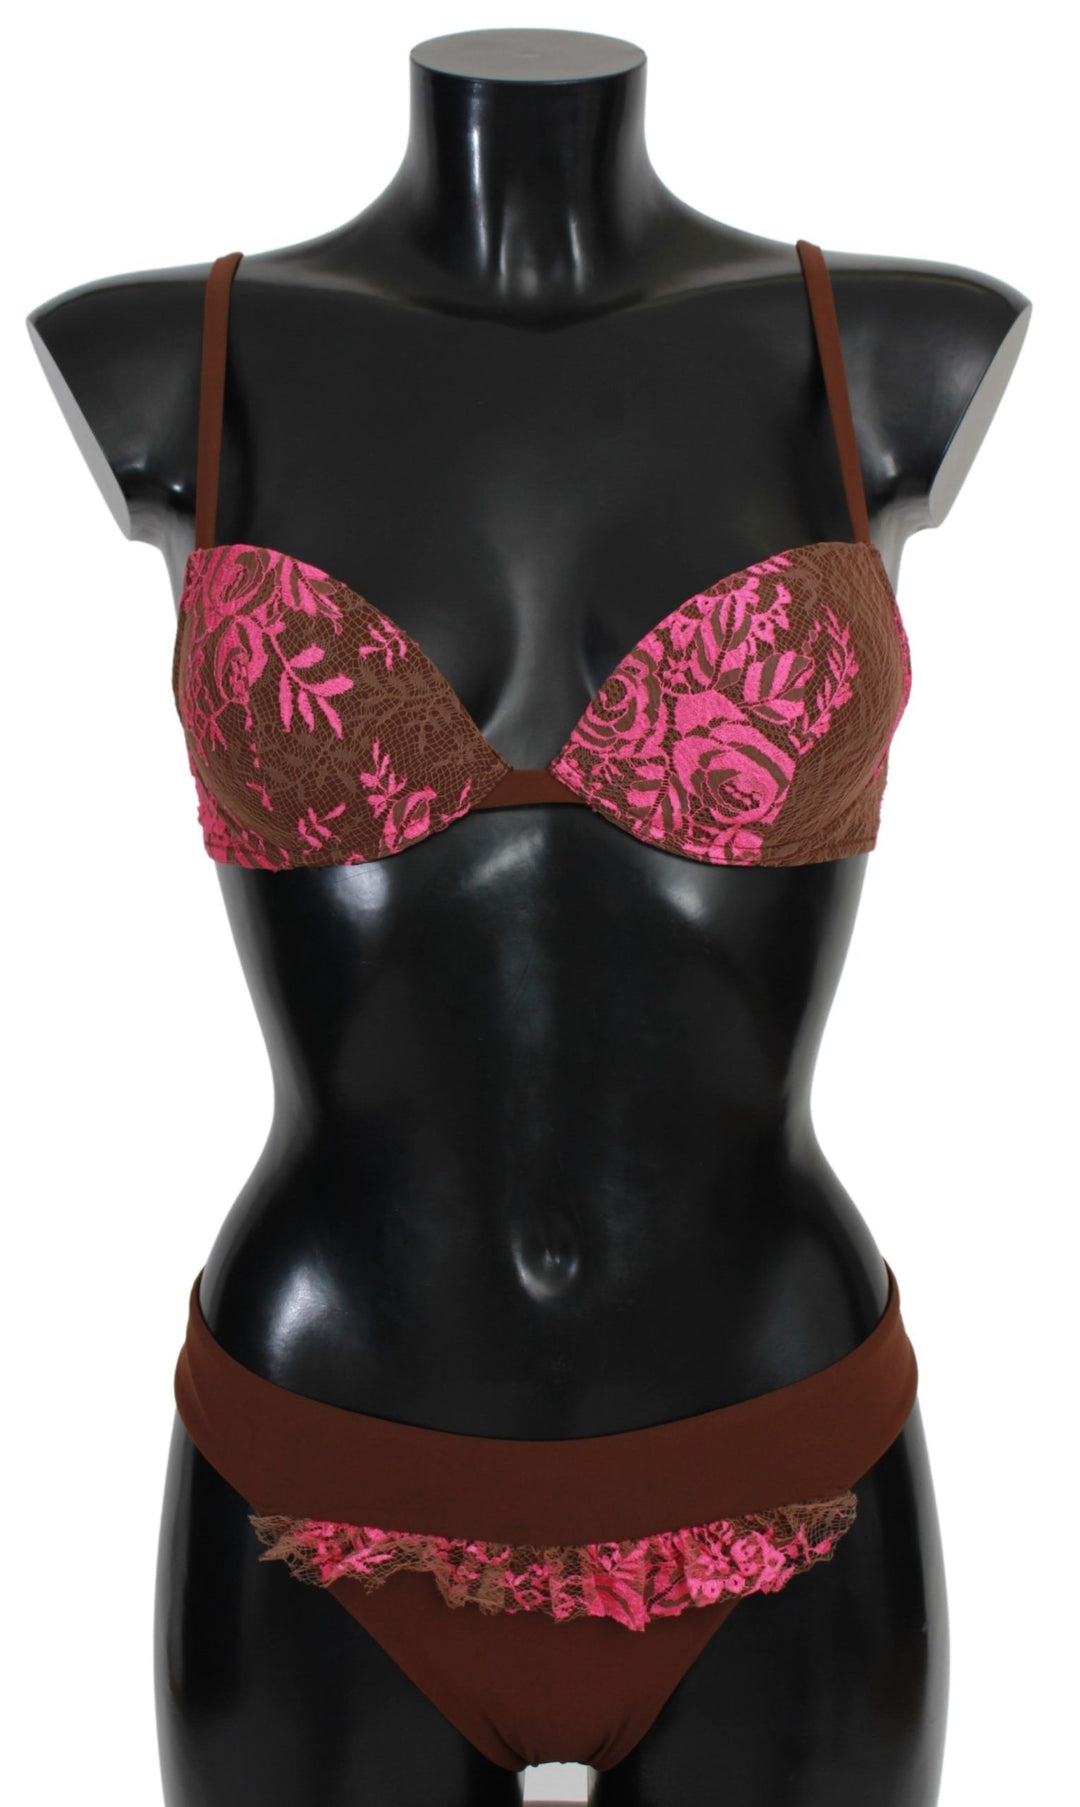 PINK MEMORIES Chic Pink and Brown Two-Piece Swimsuit